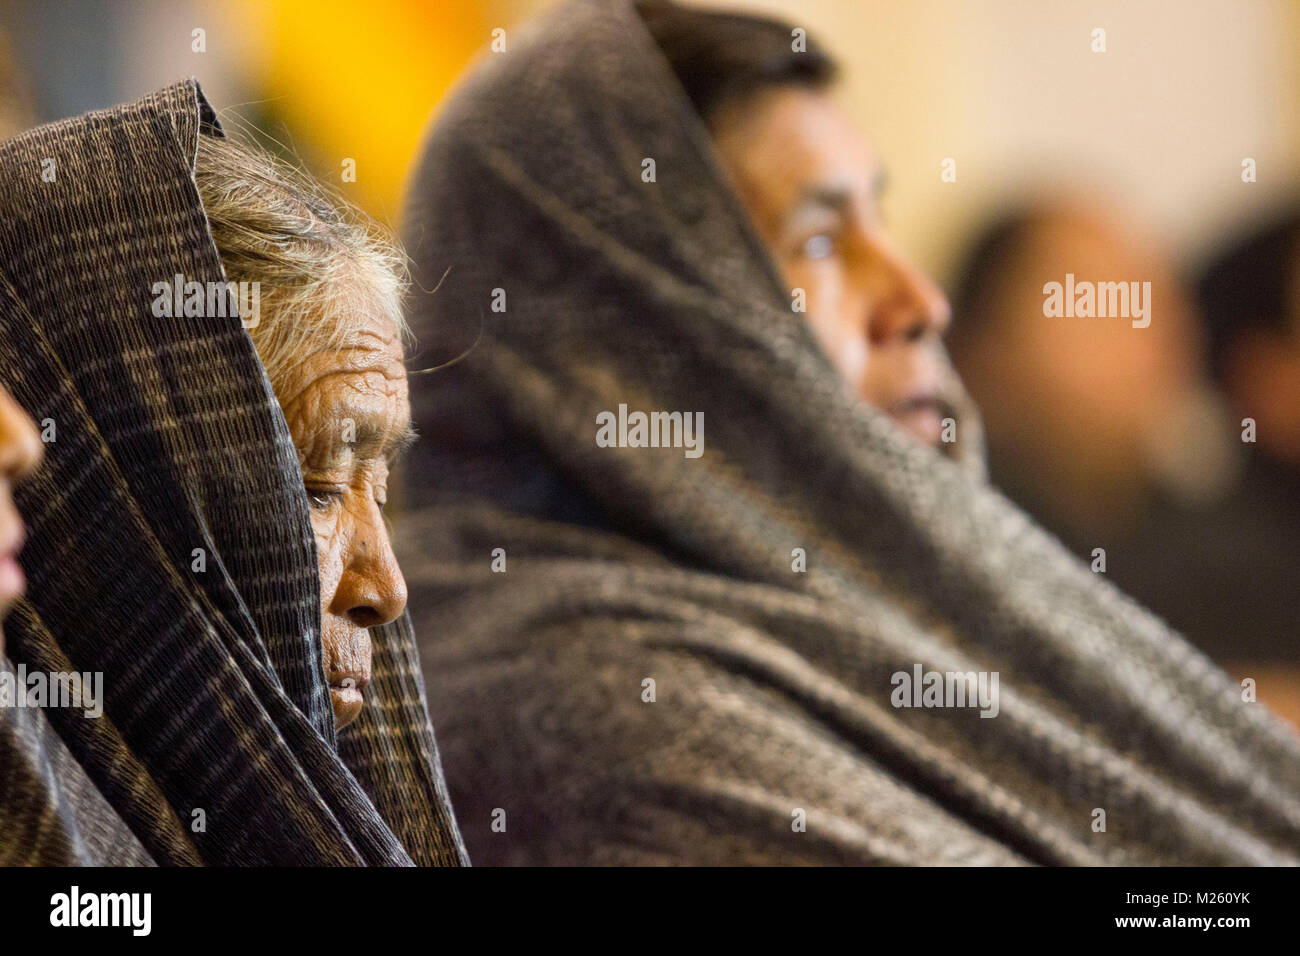 A portrait of two mexican indigenous women with their heads covered by a rebozo Stock Photo